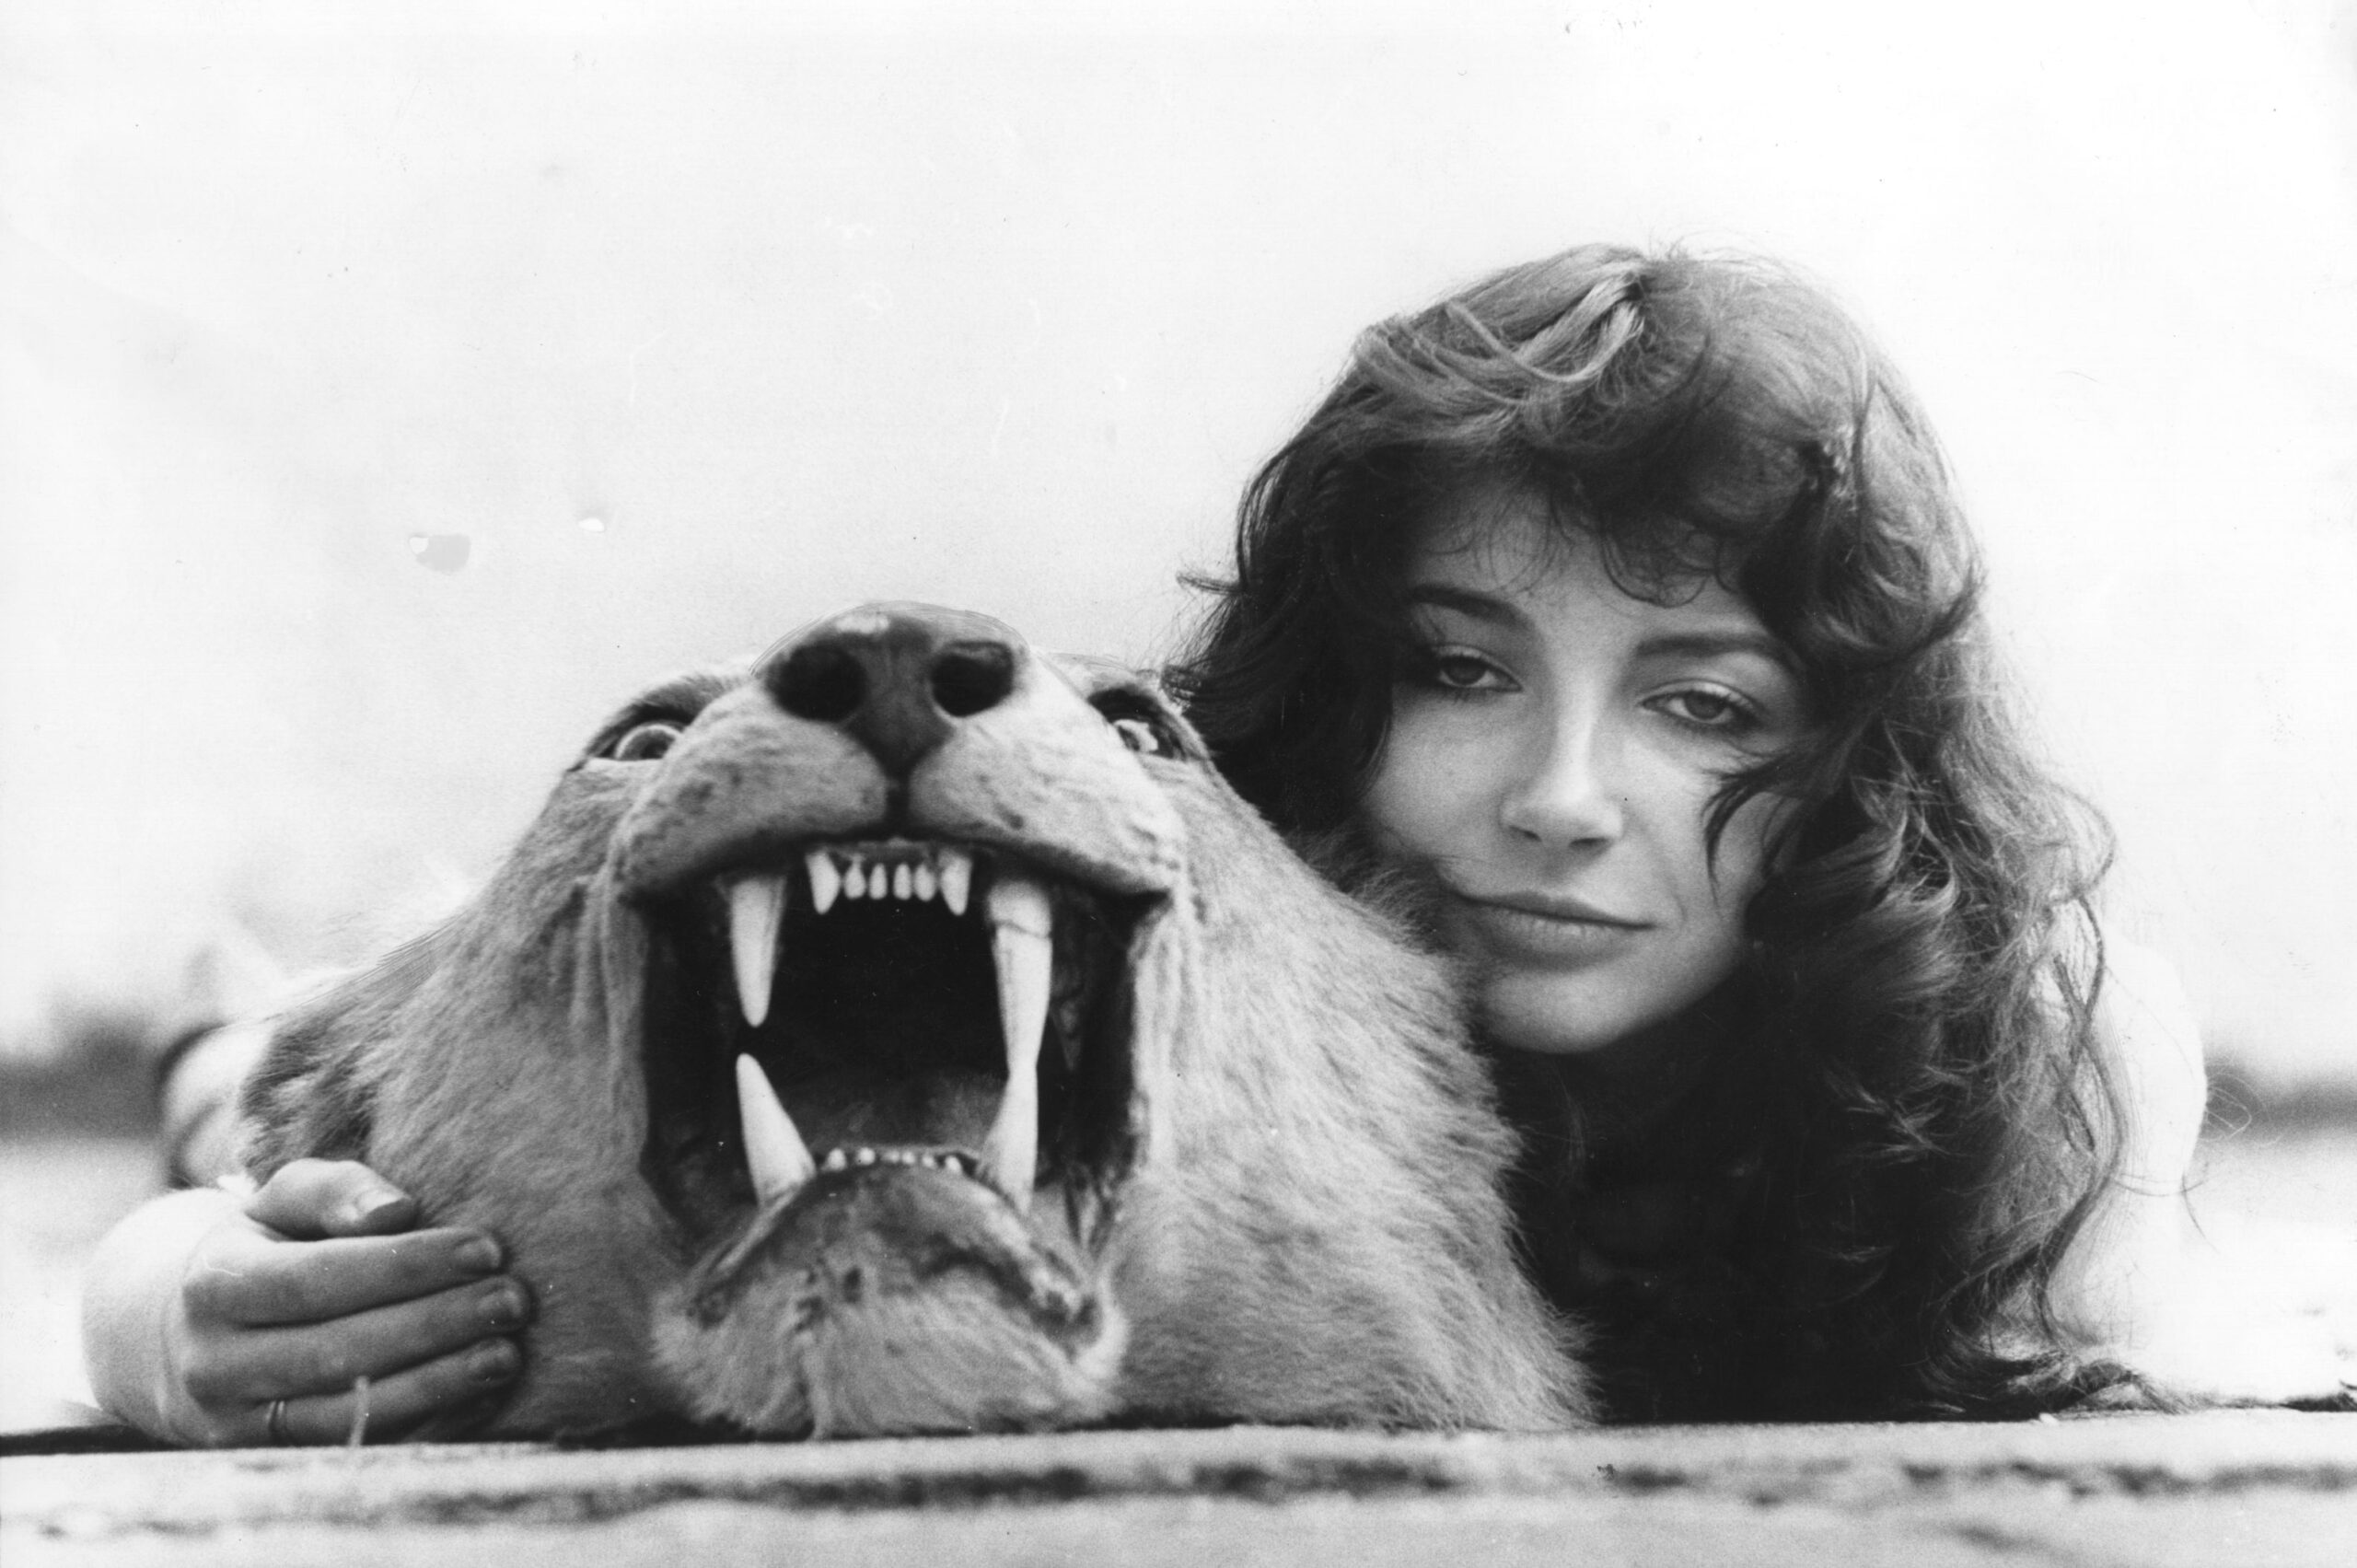 Kate Bush turns 64 on July 30. (Credit: Chris Moorhouse/Evening Standard/Hulton Archive/Getty Images)